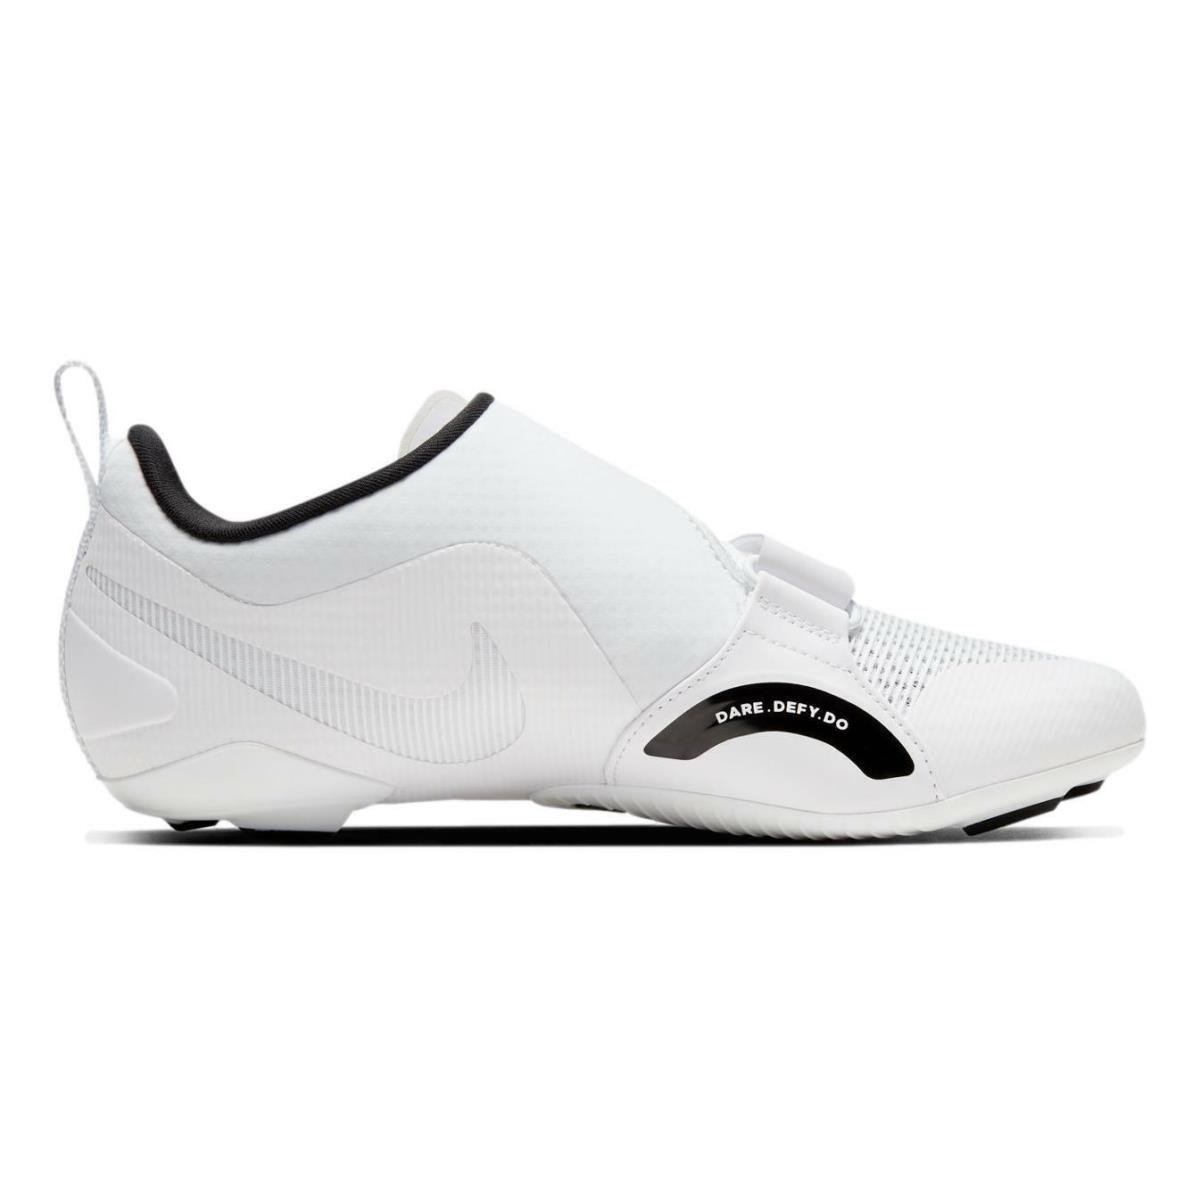 Nike shoes SuperRep Cycle - White 2